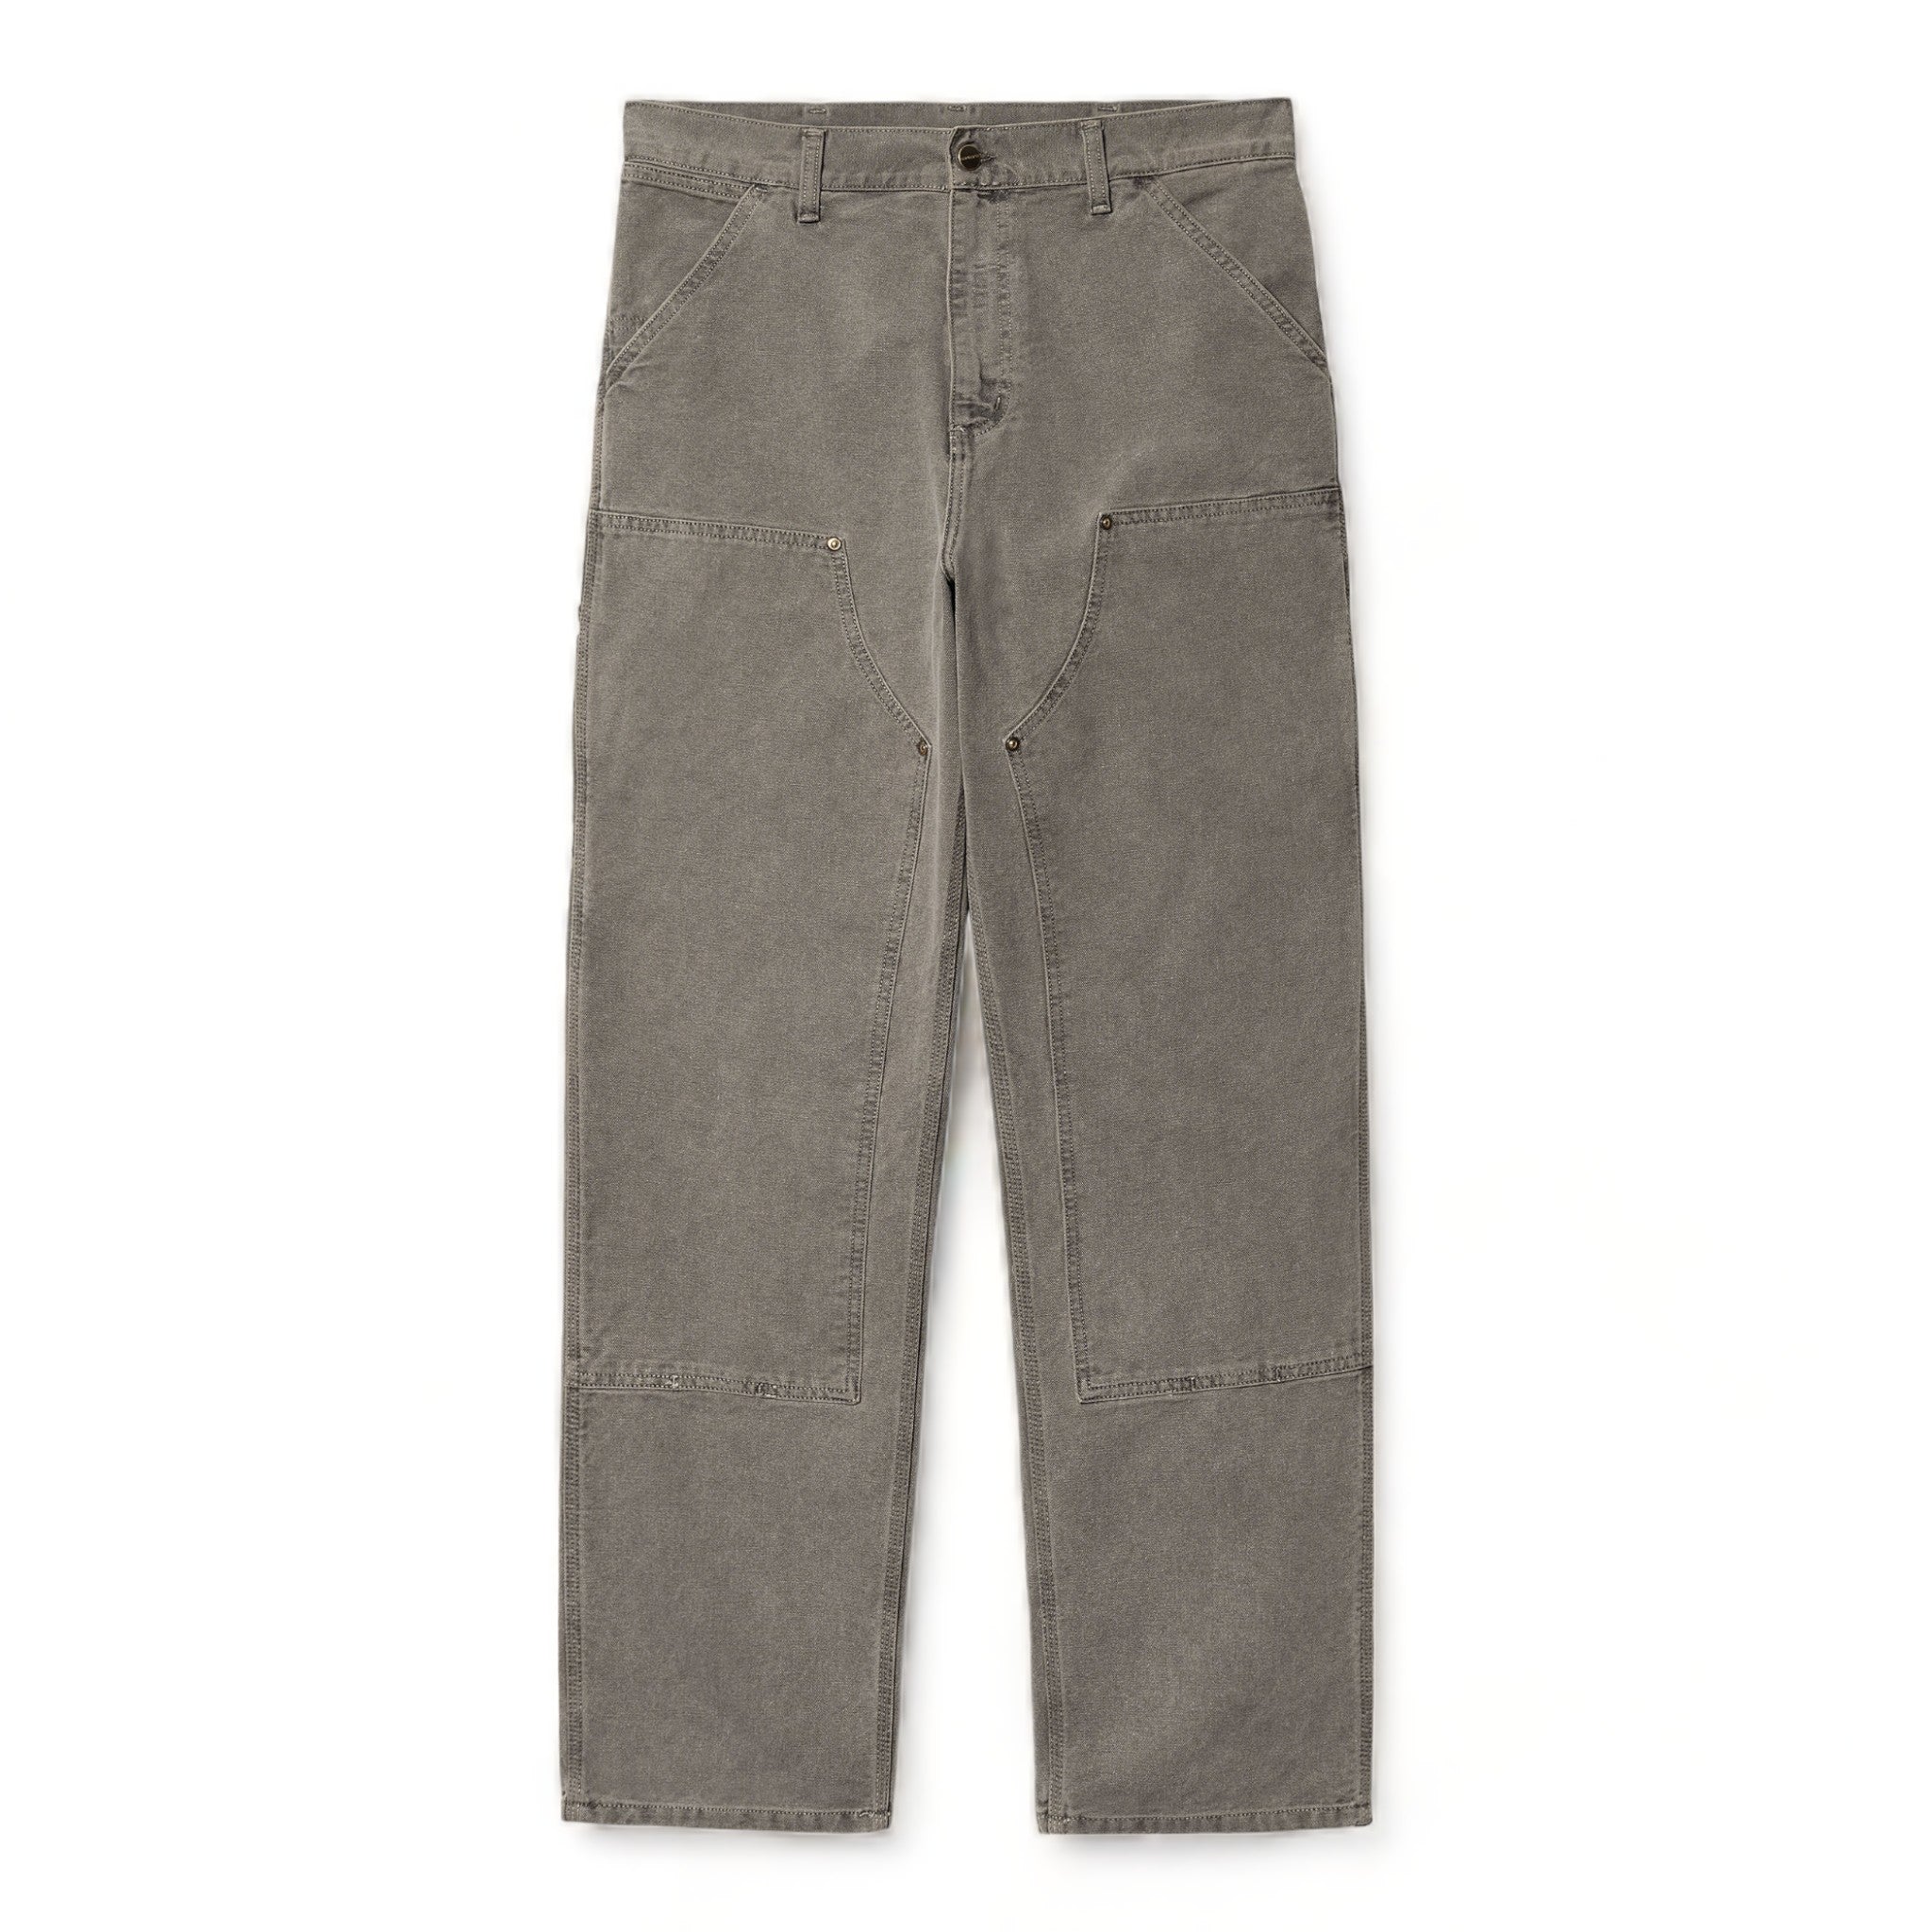 CARHARTT WIP DOUBLE KNEE PANT – deviceone